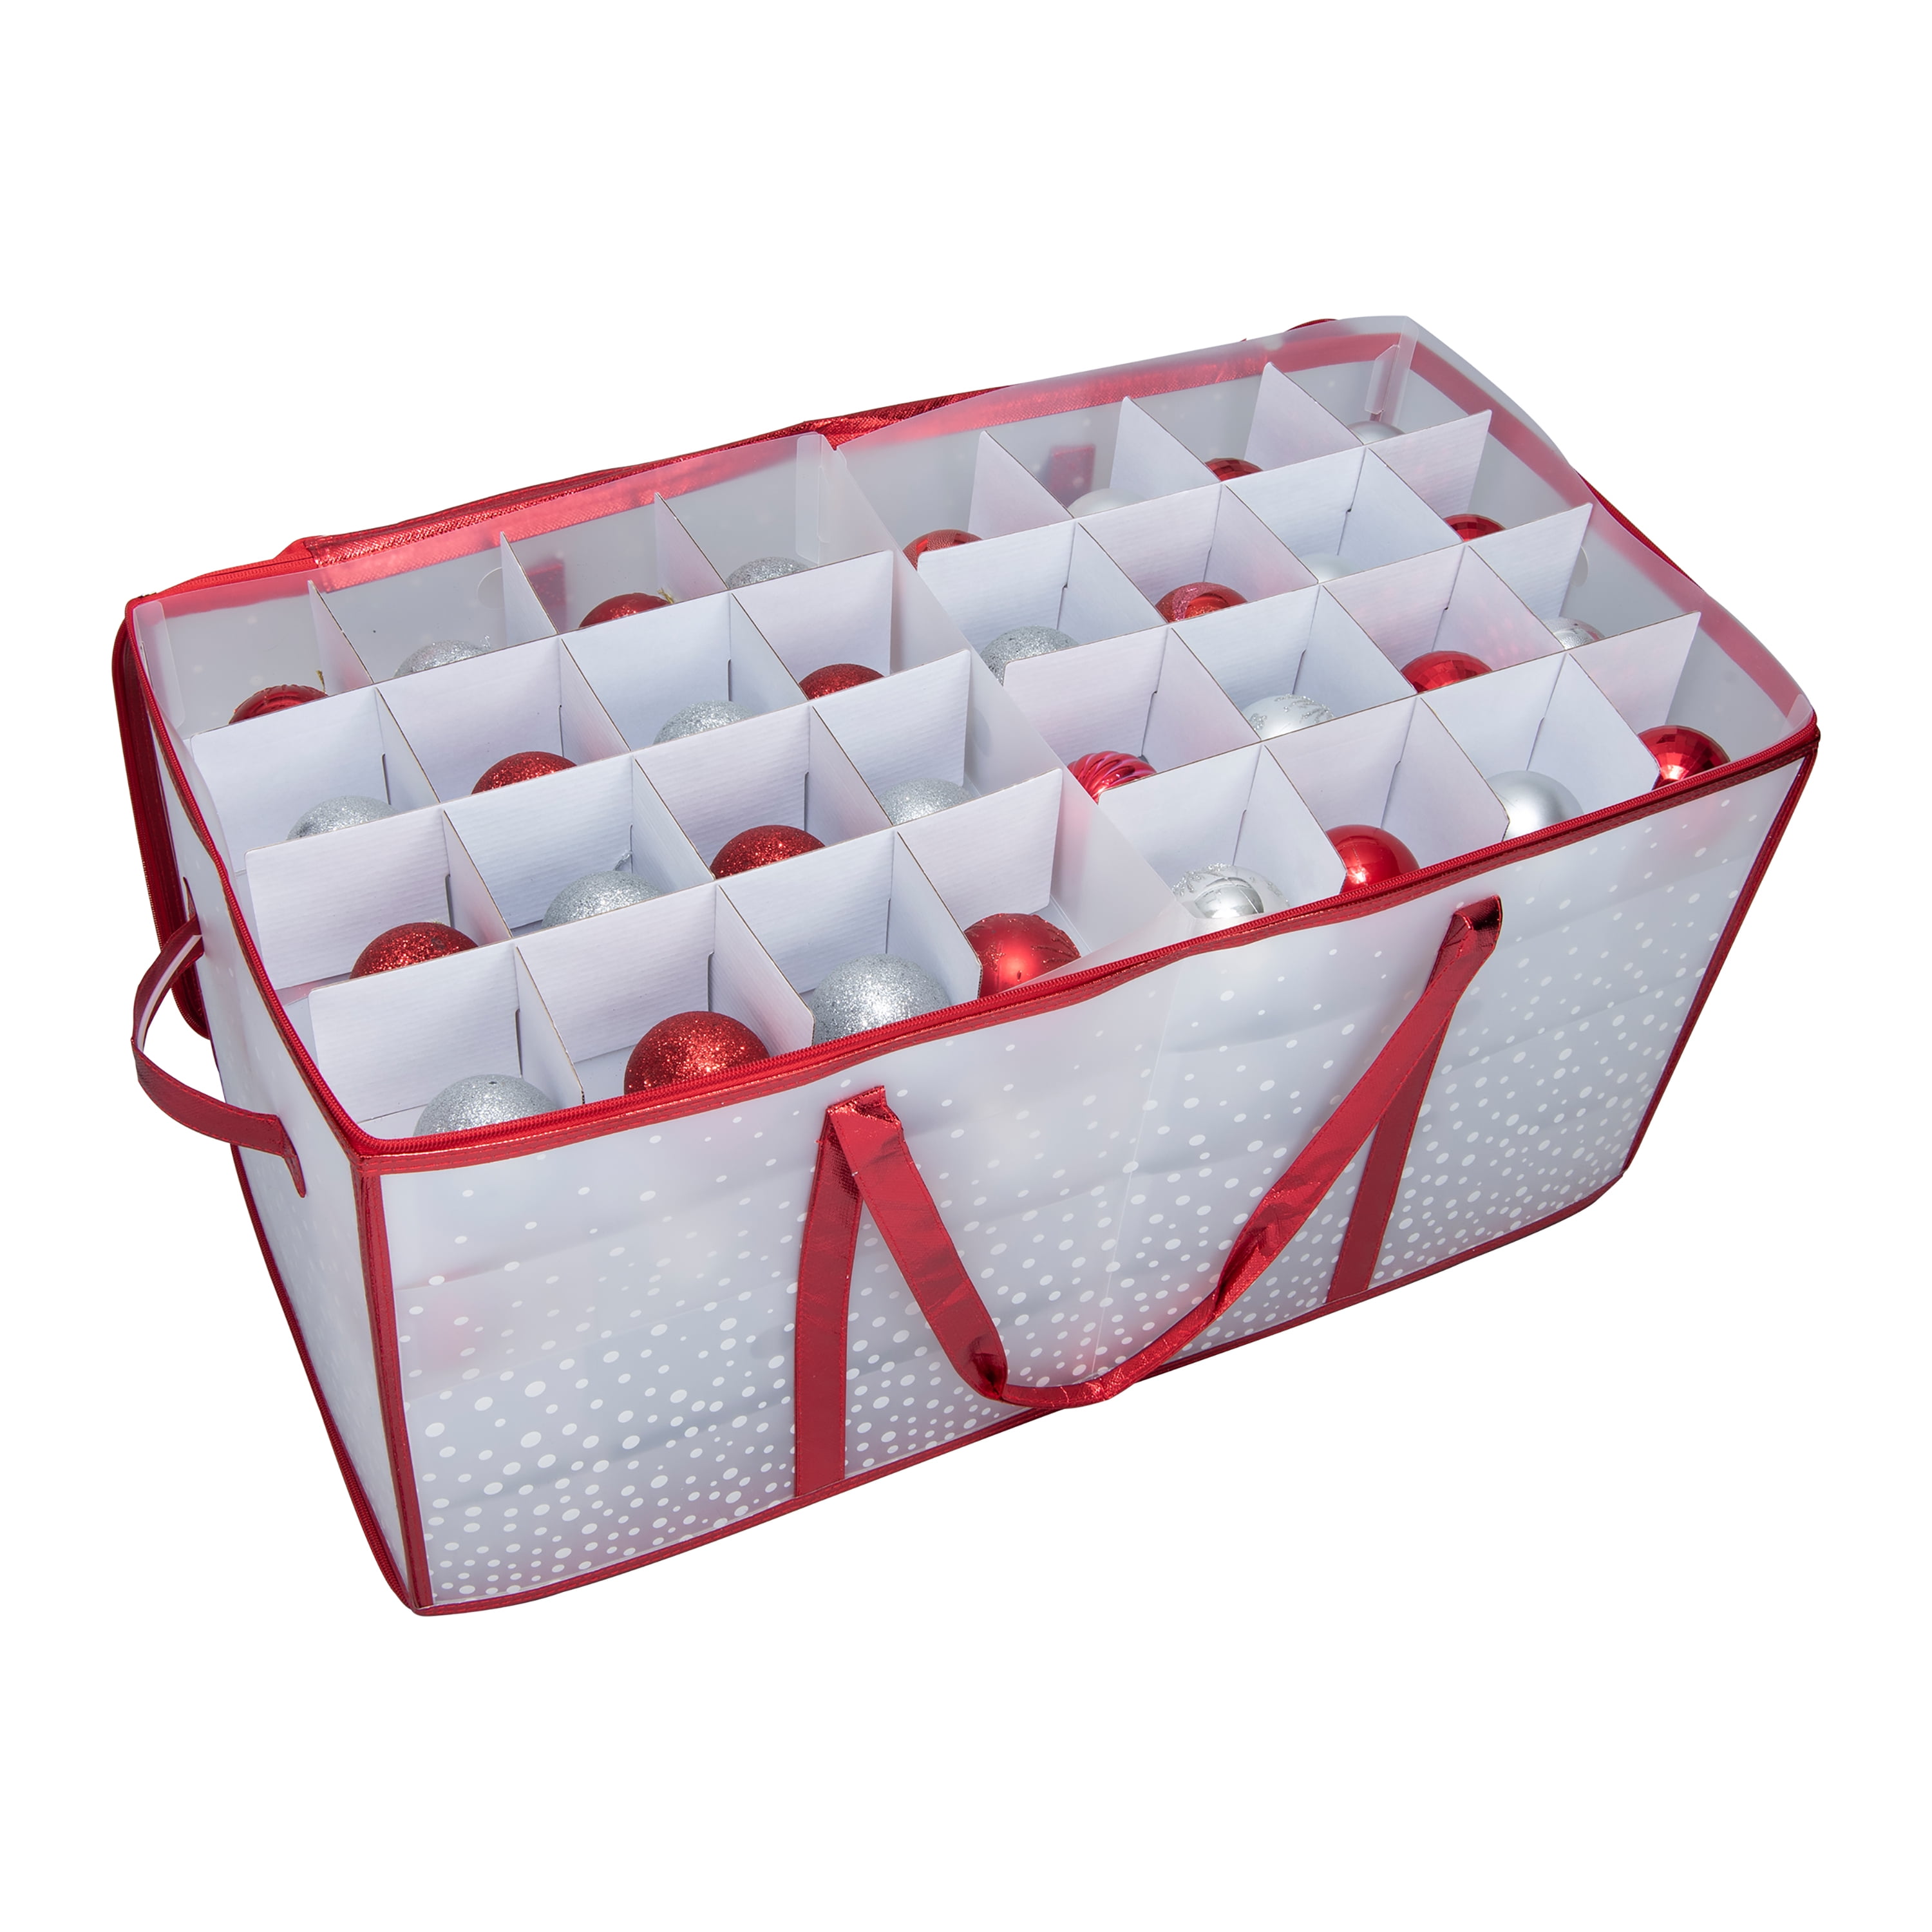 Dyno 12 Red and Clear Square Christmas Ornament Storage Bag, 1